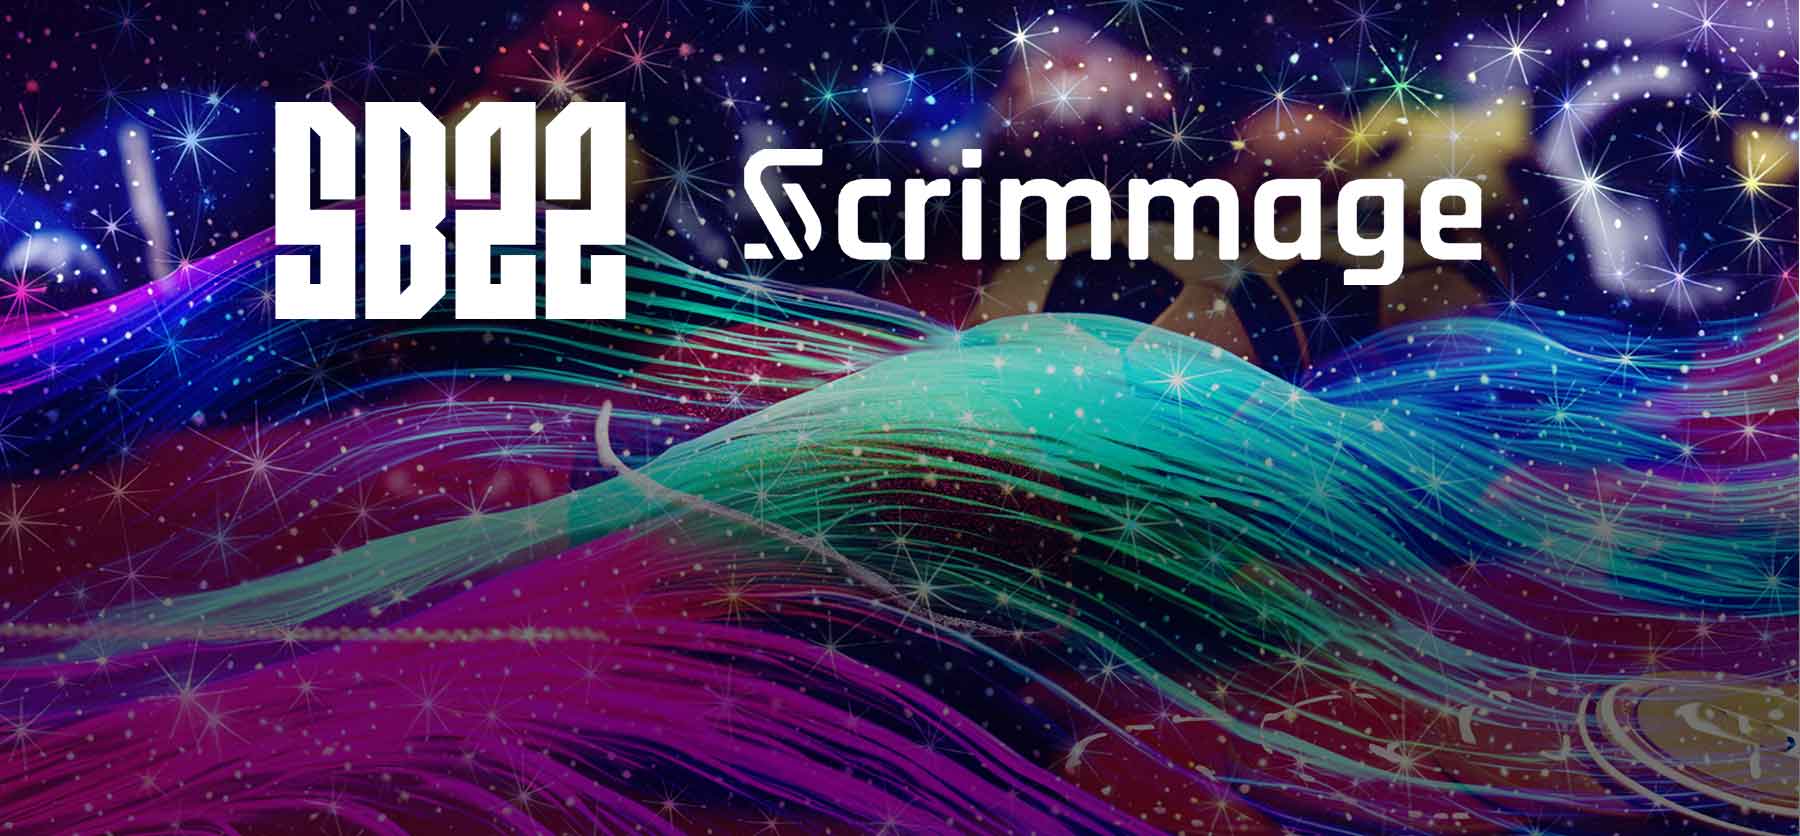 SB22 Proudly Announces Partnership with Scrimmage, to Revolutionize Sports Betting